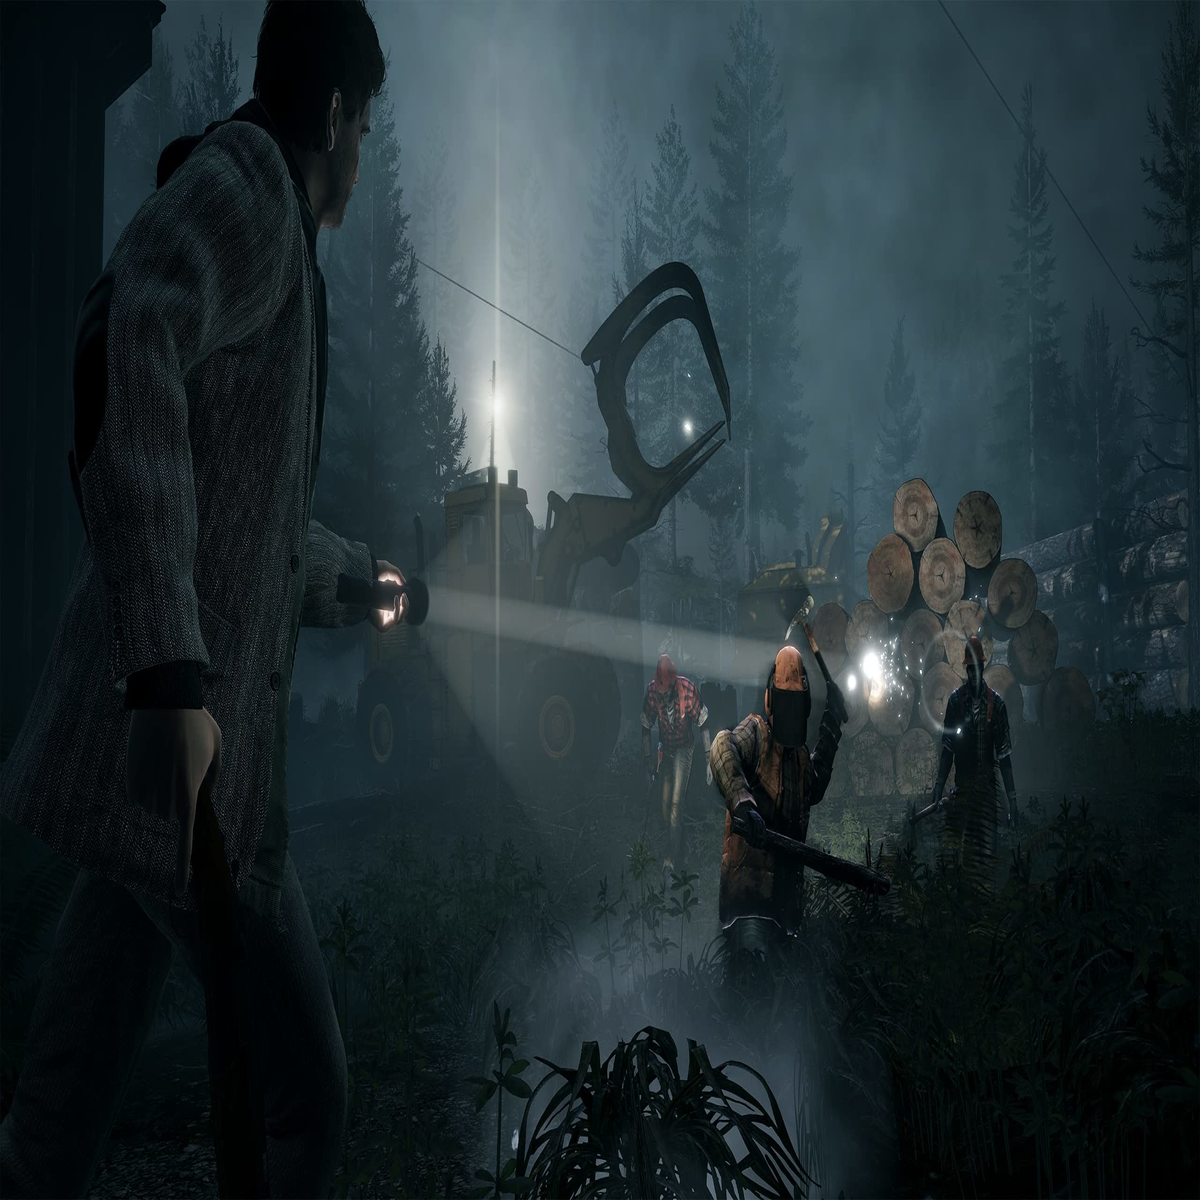 Alan Wake 2 (PC/Console) Preview - Video Game Reviews, News